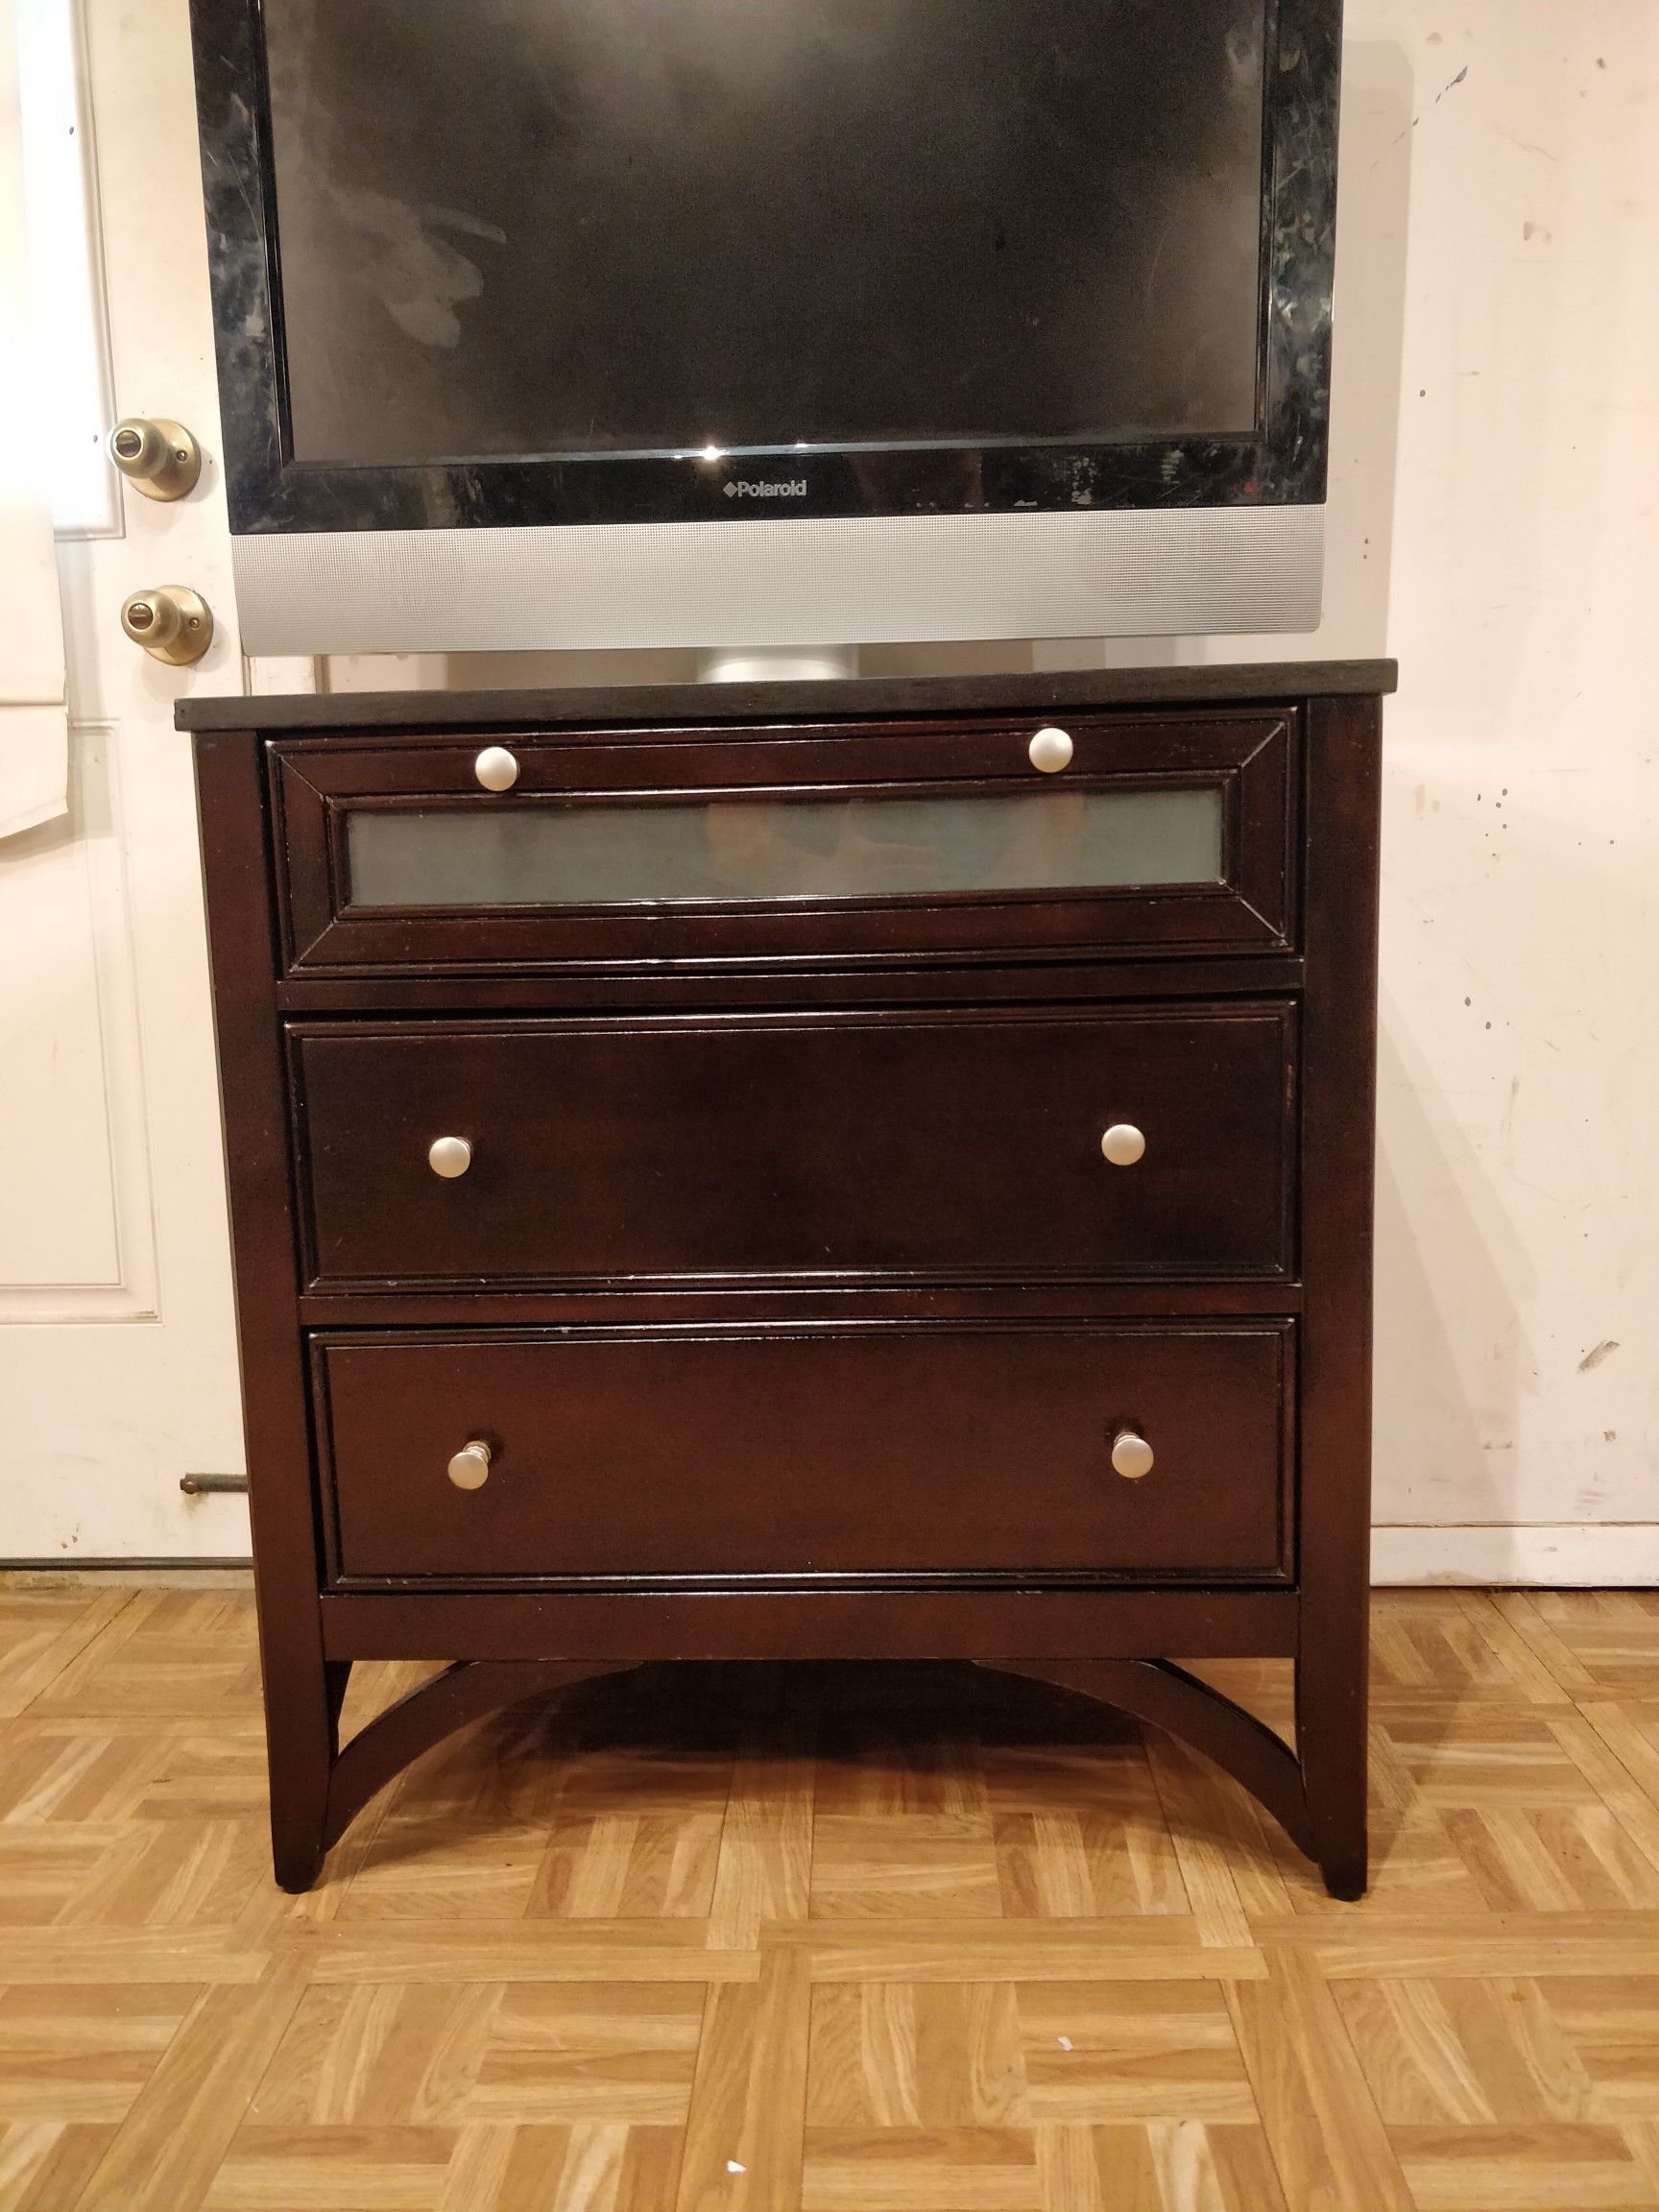 Solid wood big night stand with 3 drawers in great condition all drawers working well dovetail drawers, let me know when